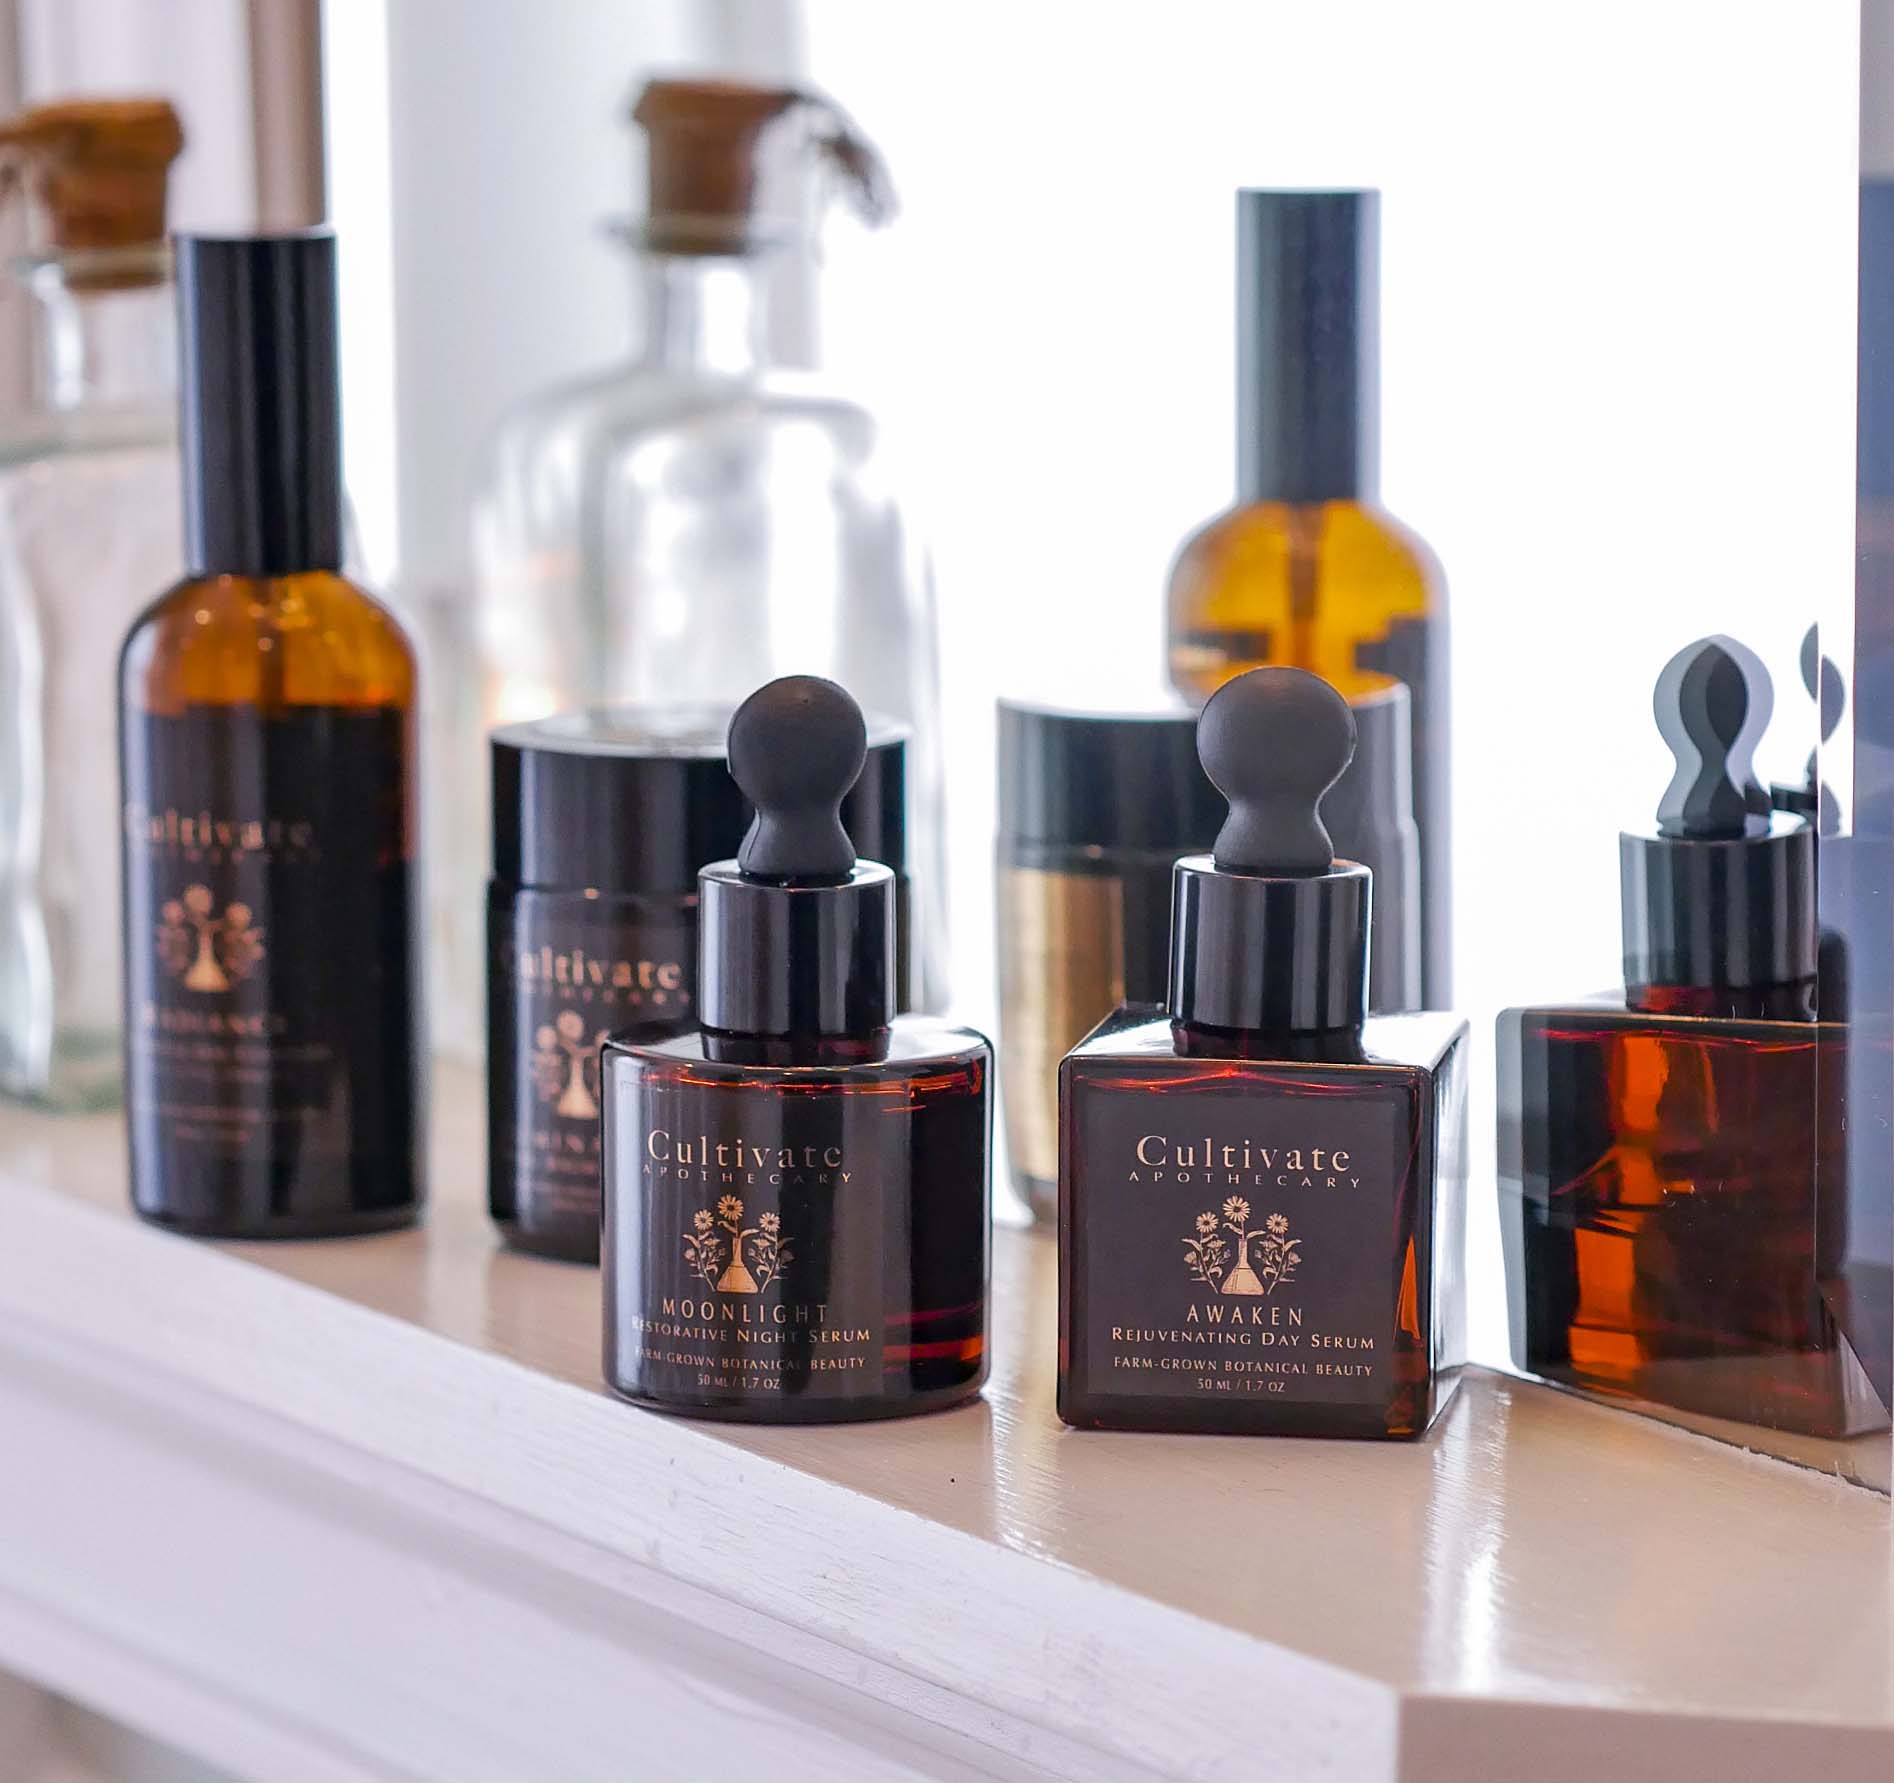 Botanical skincare essentials from skin apothecary Cultivate Apothecary at Stonegate Farm.